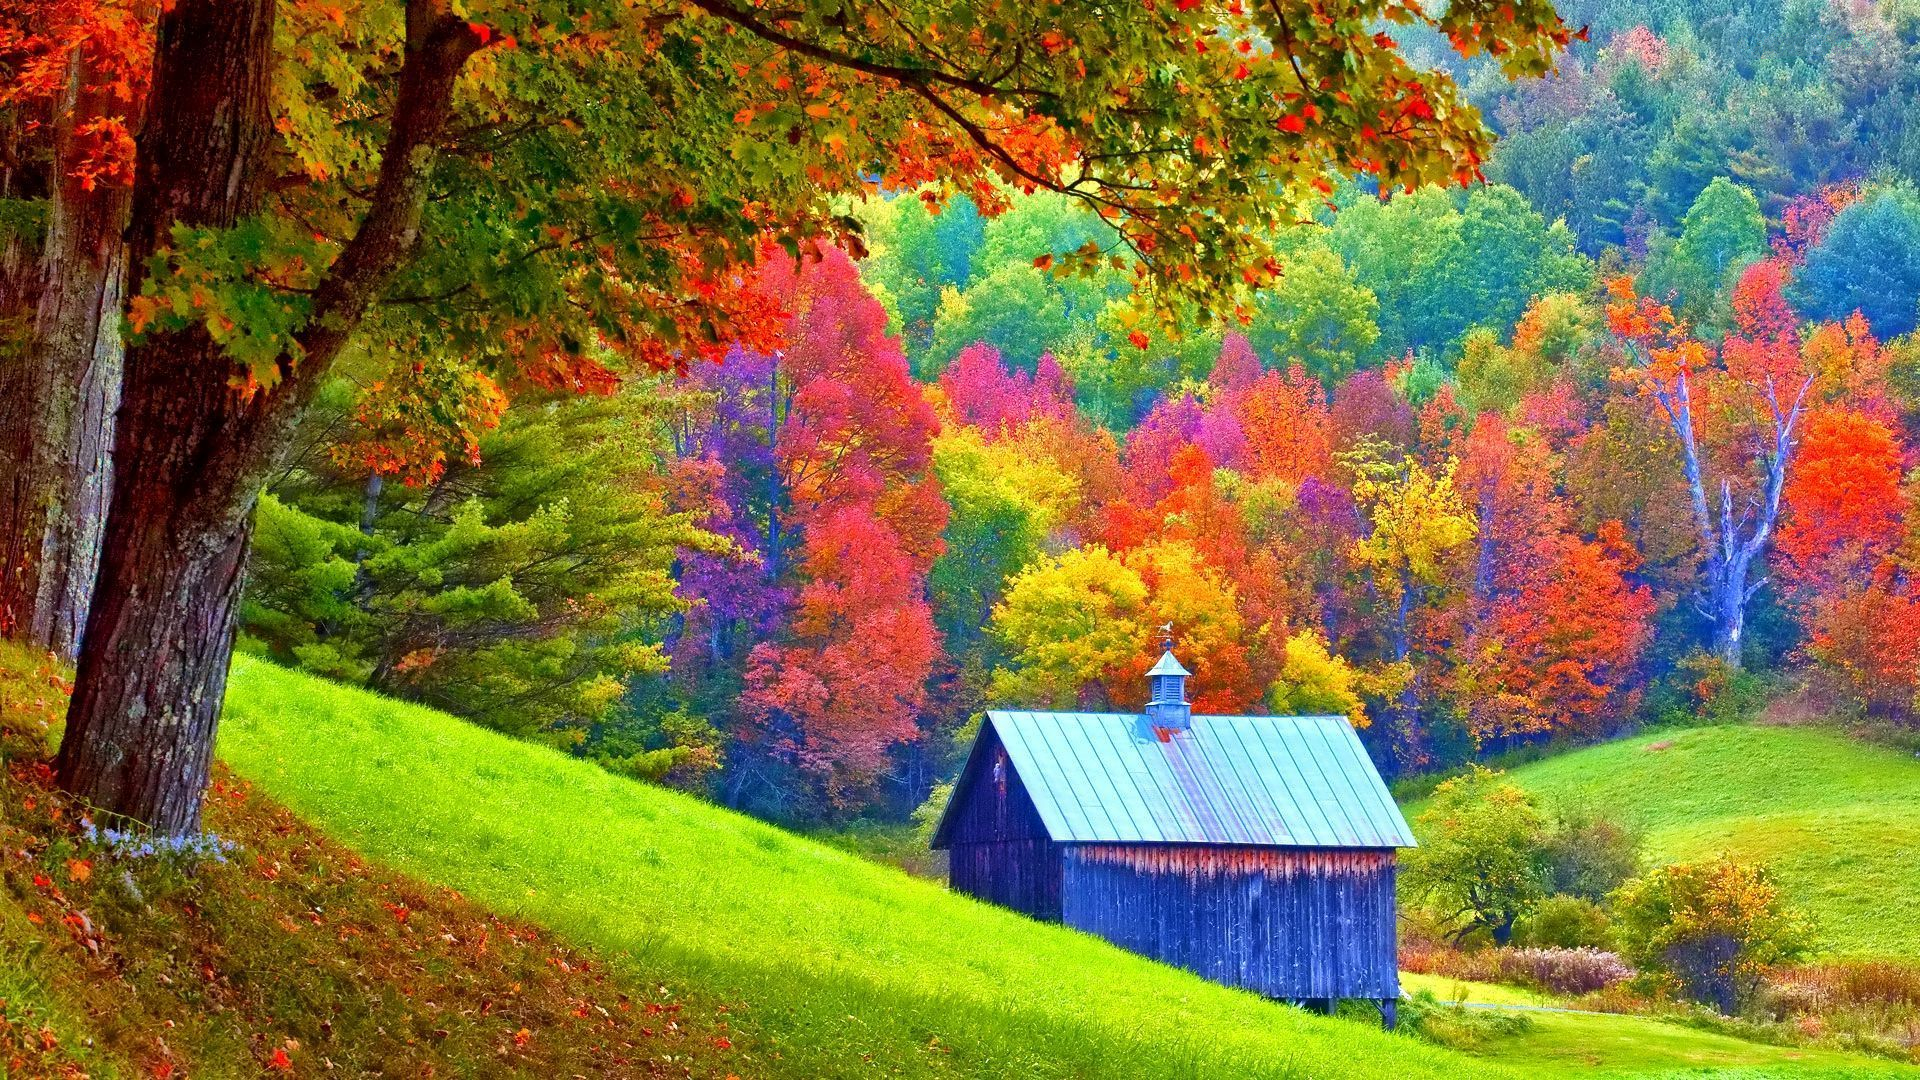 man made, shed, fall, forest, tree